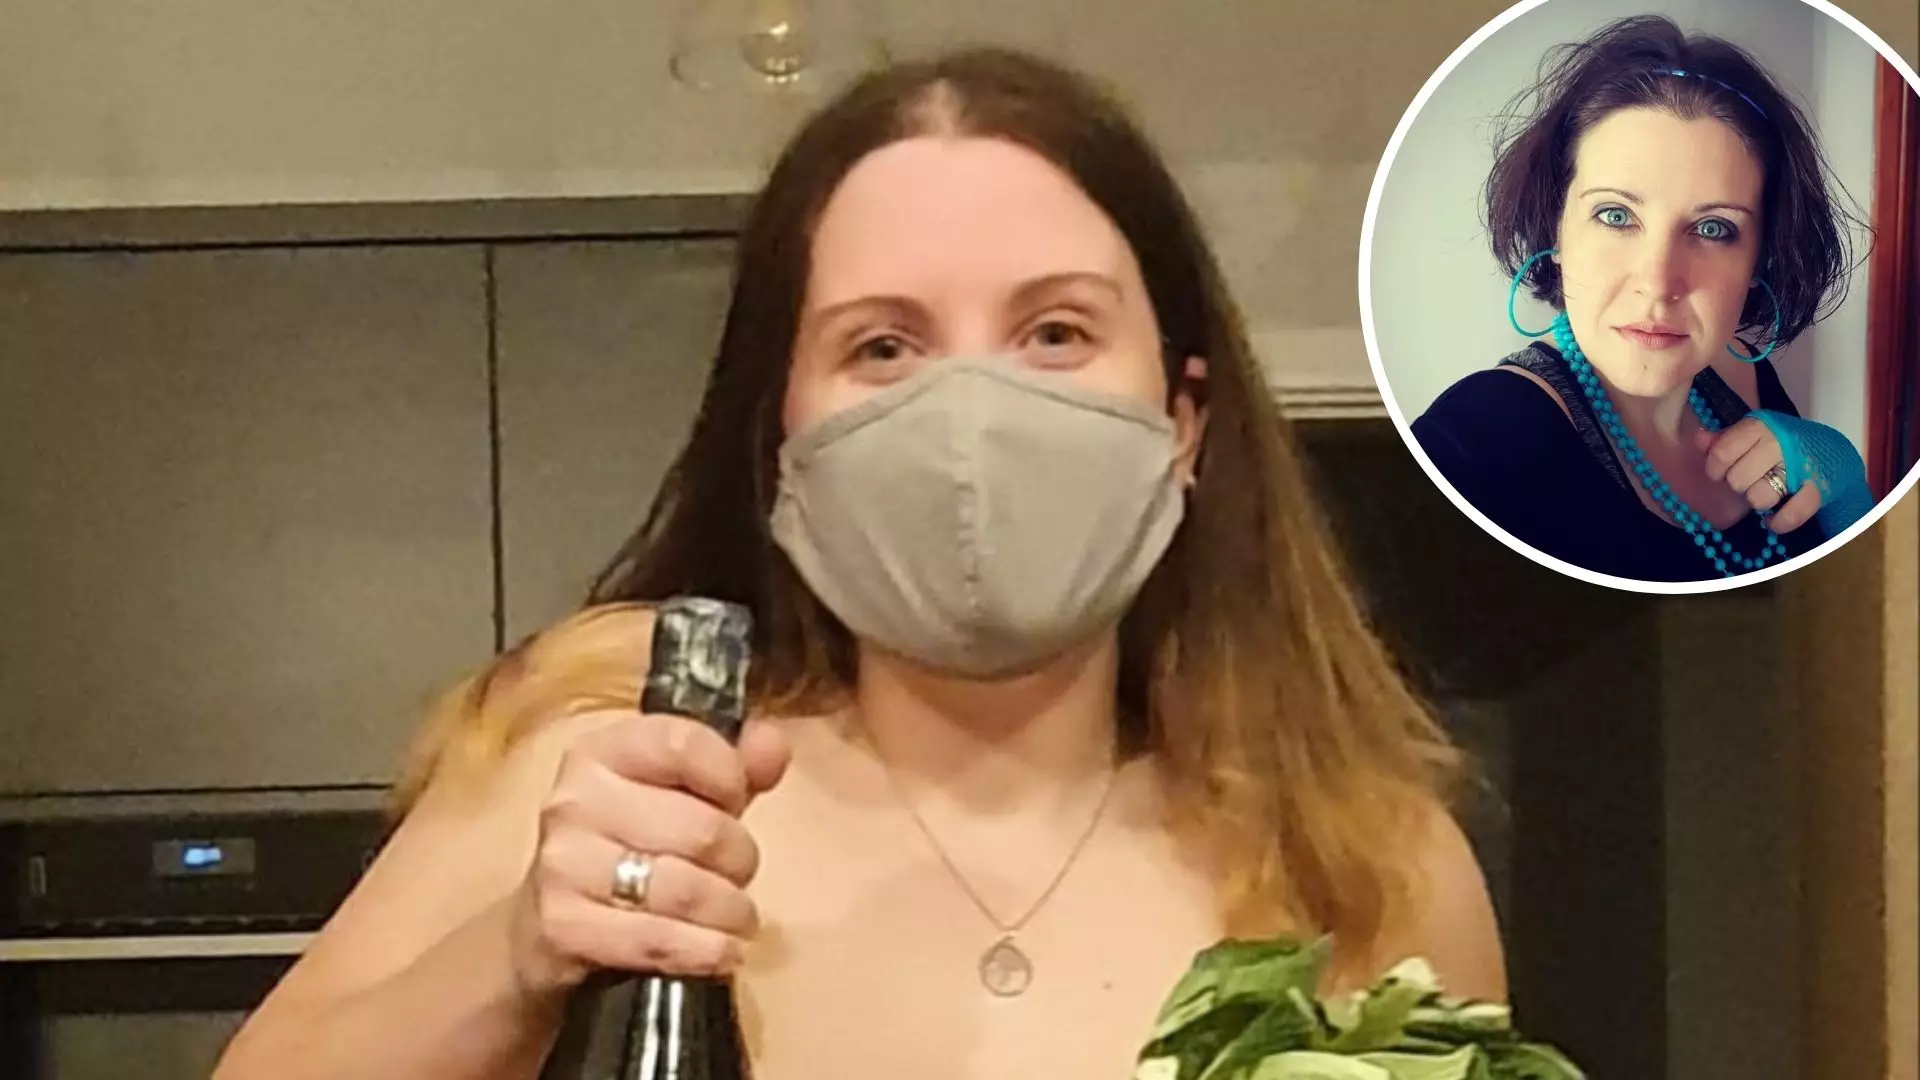 Woman Covers Breasts With Prosecco And Cauliflower As Clothing Is 'Non-Essential' In Wales